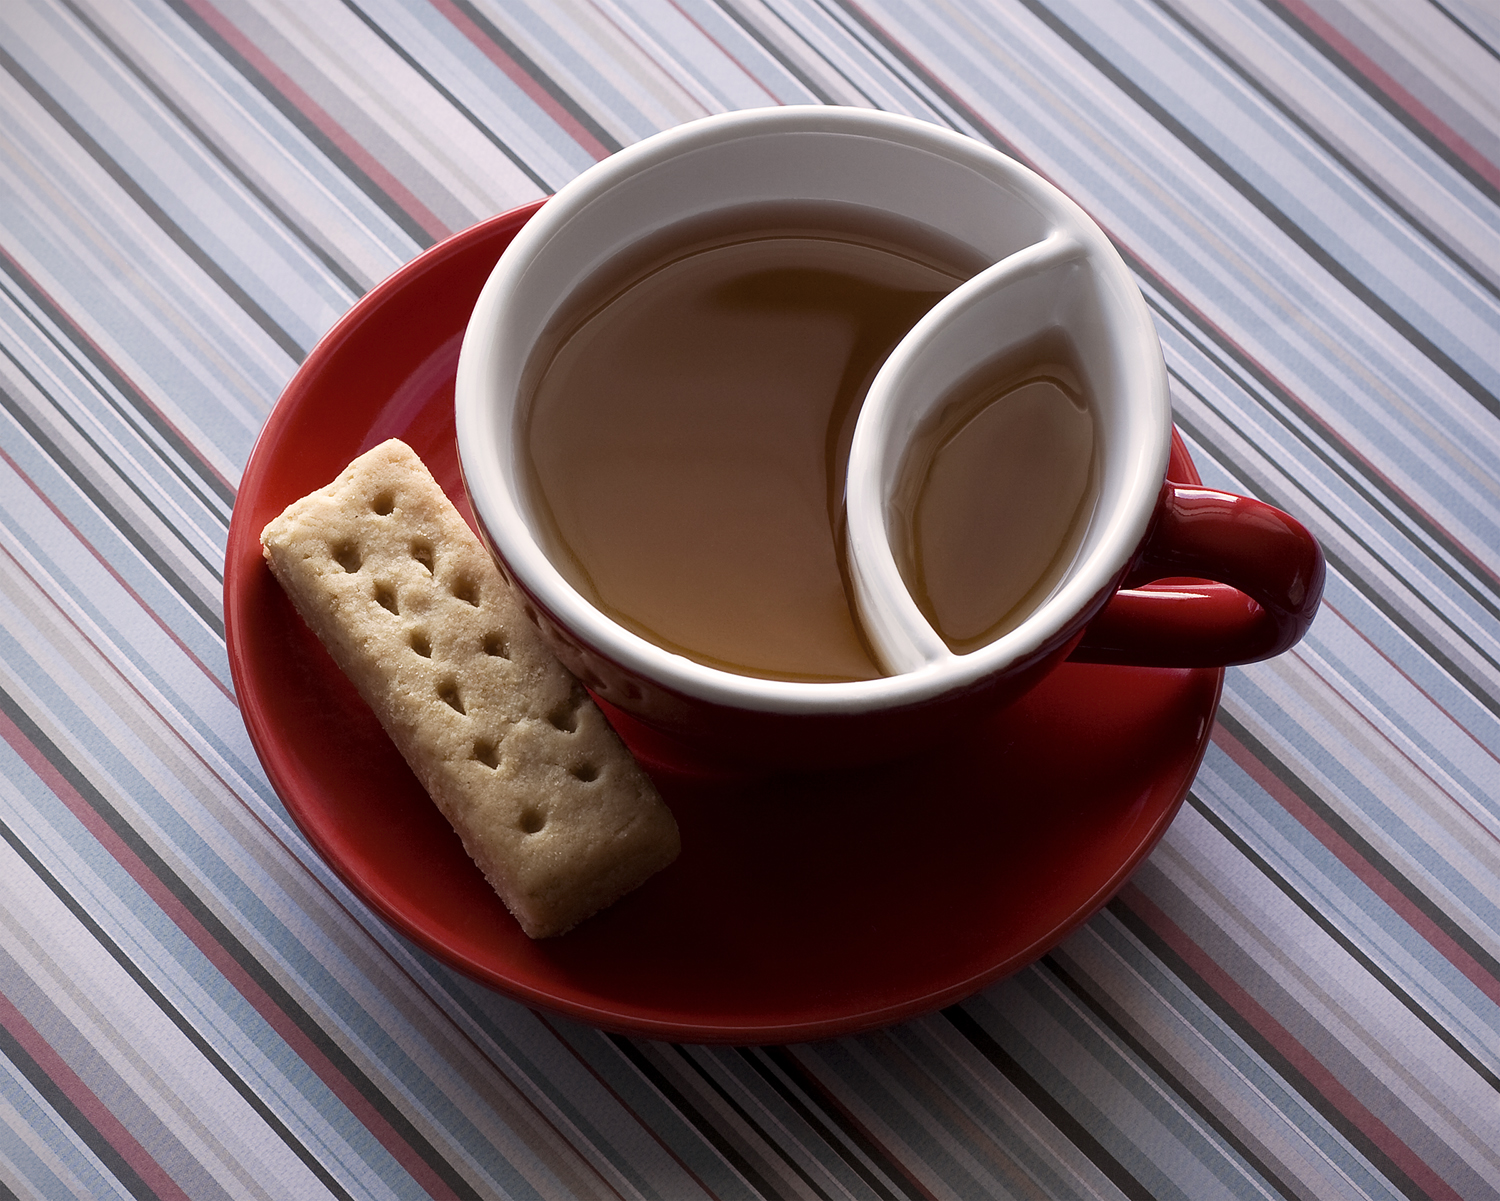 two section cup with tea and a biscuit on a red plate